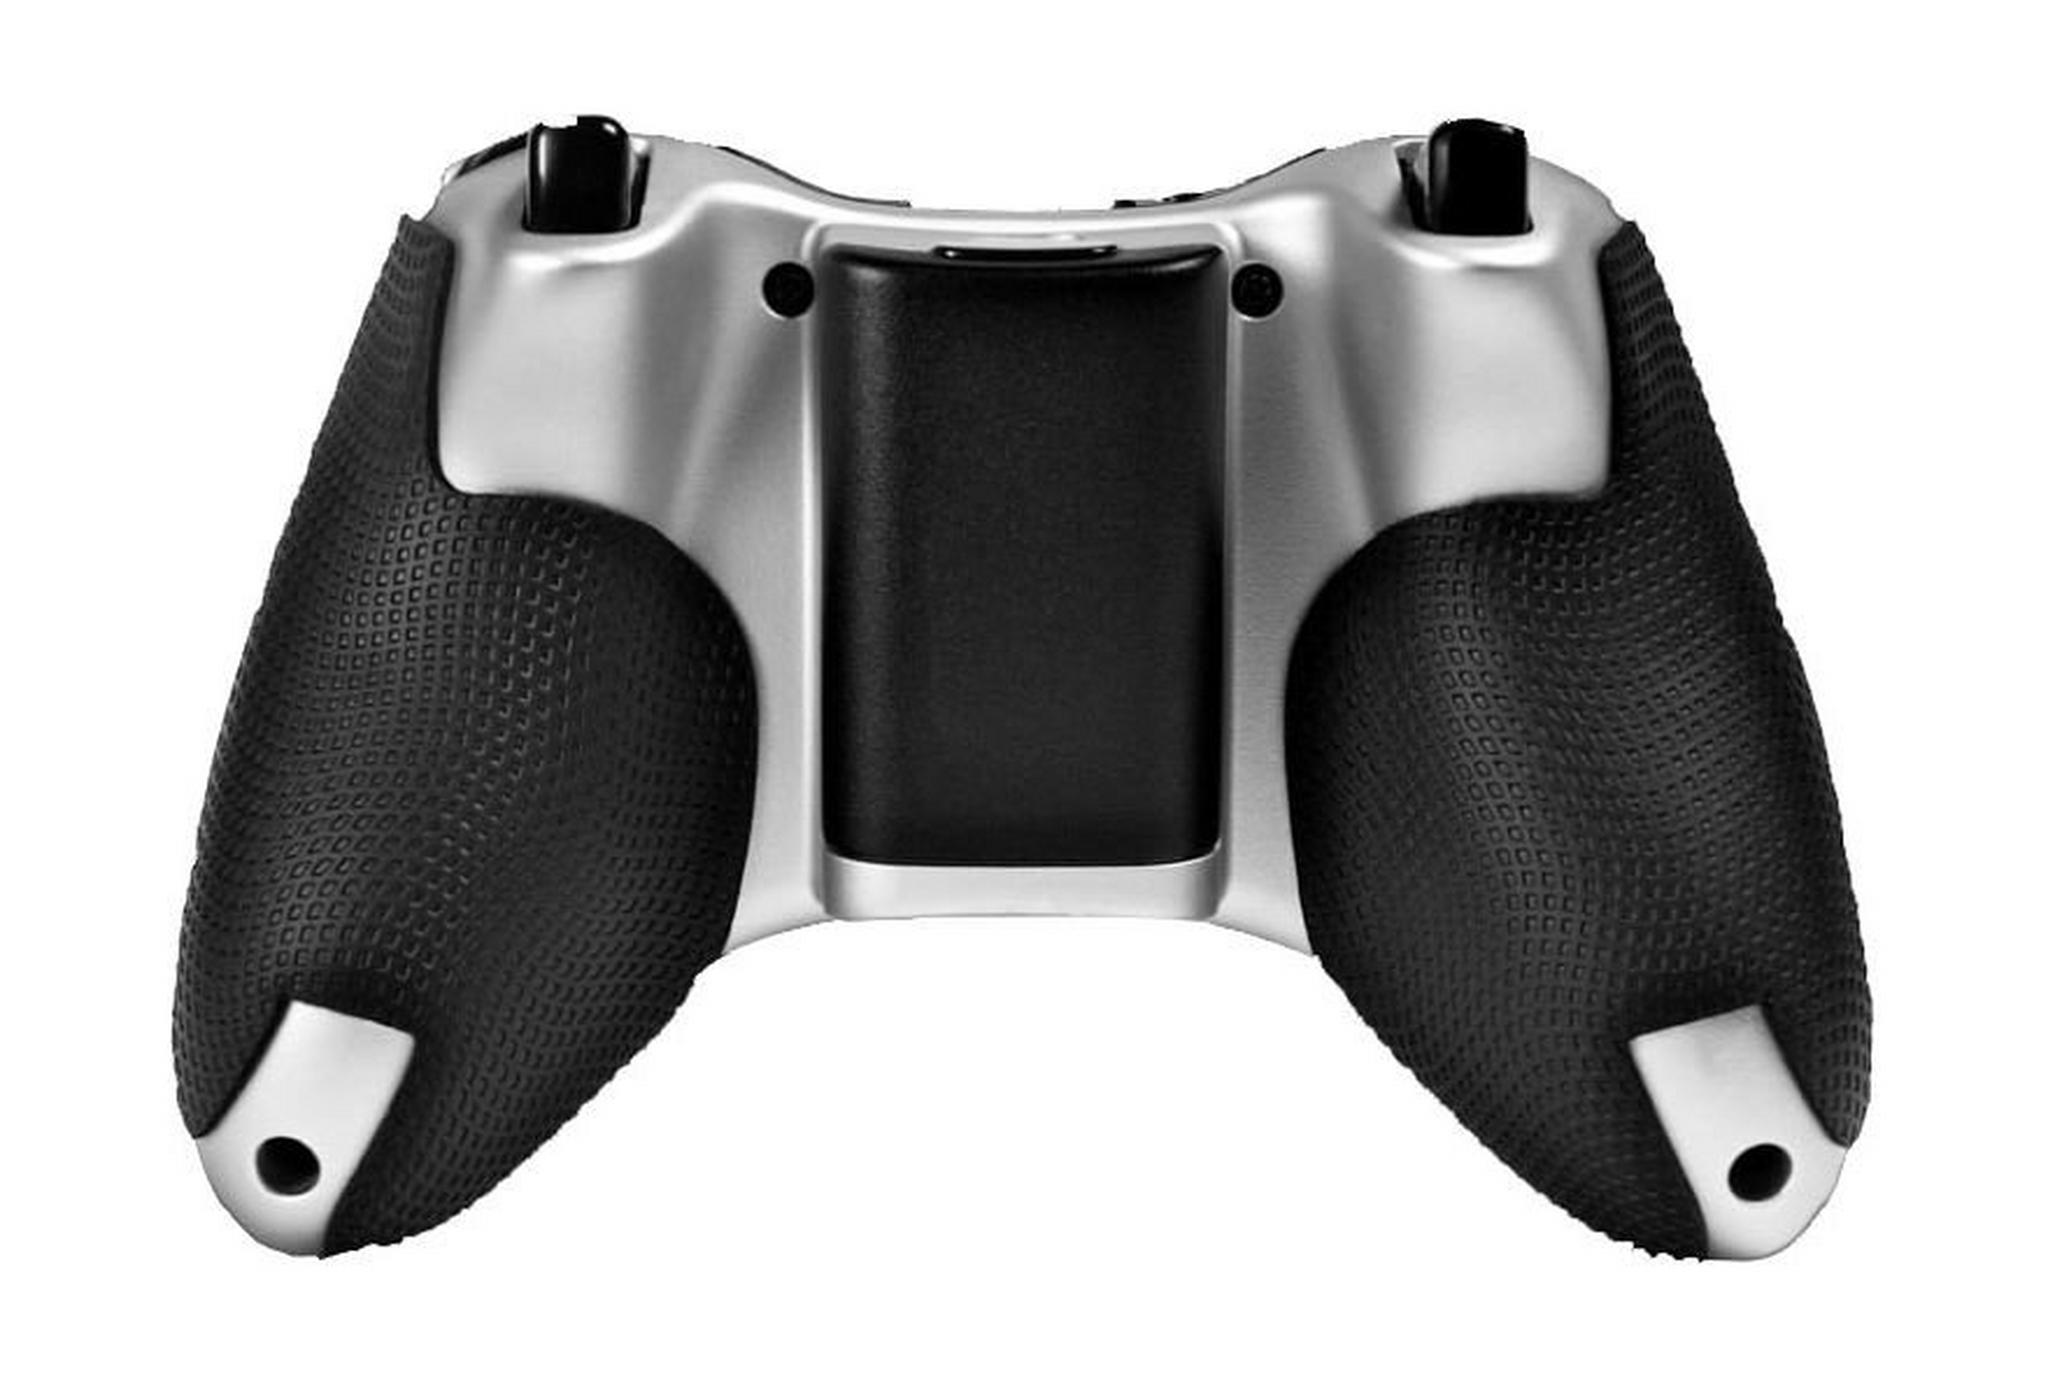 Squidgrip Wireless Controller for Xbox 360 - Black